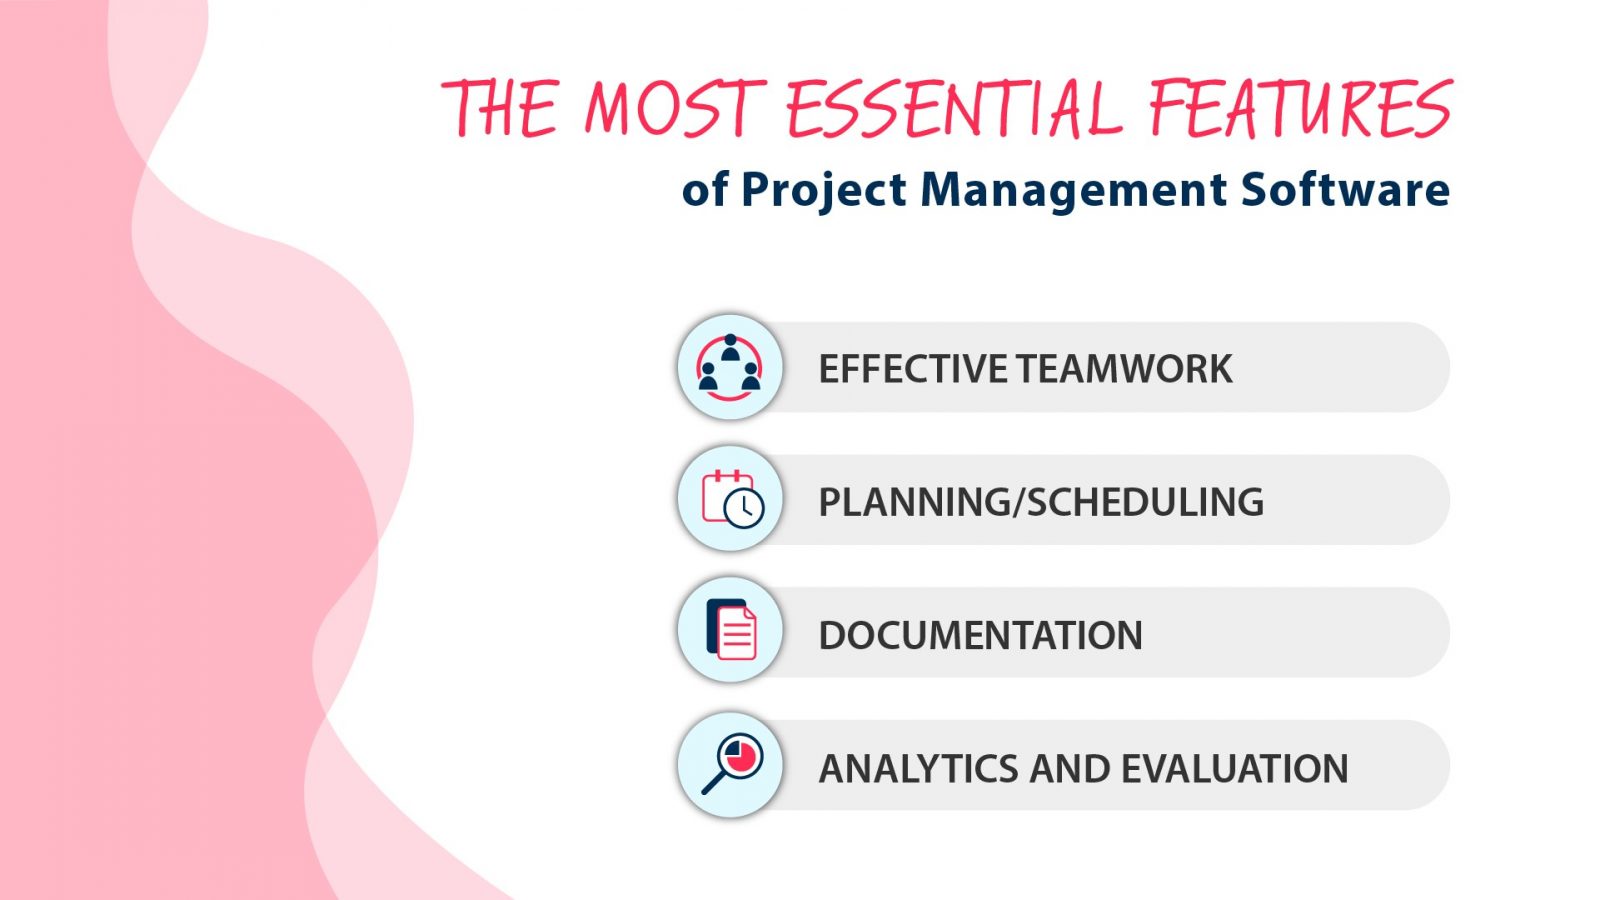 The most essential features of project management software